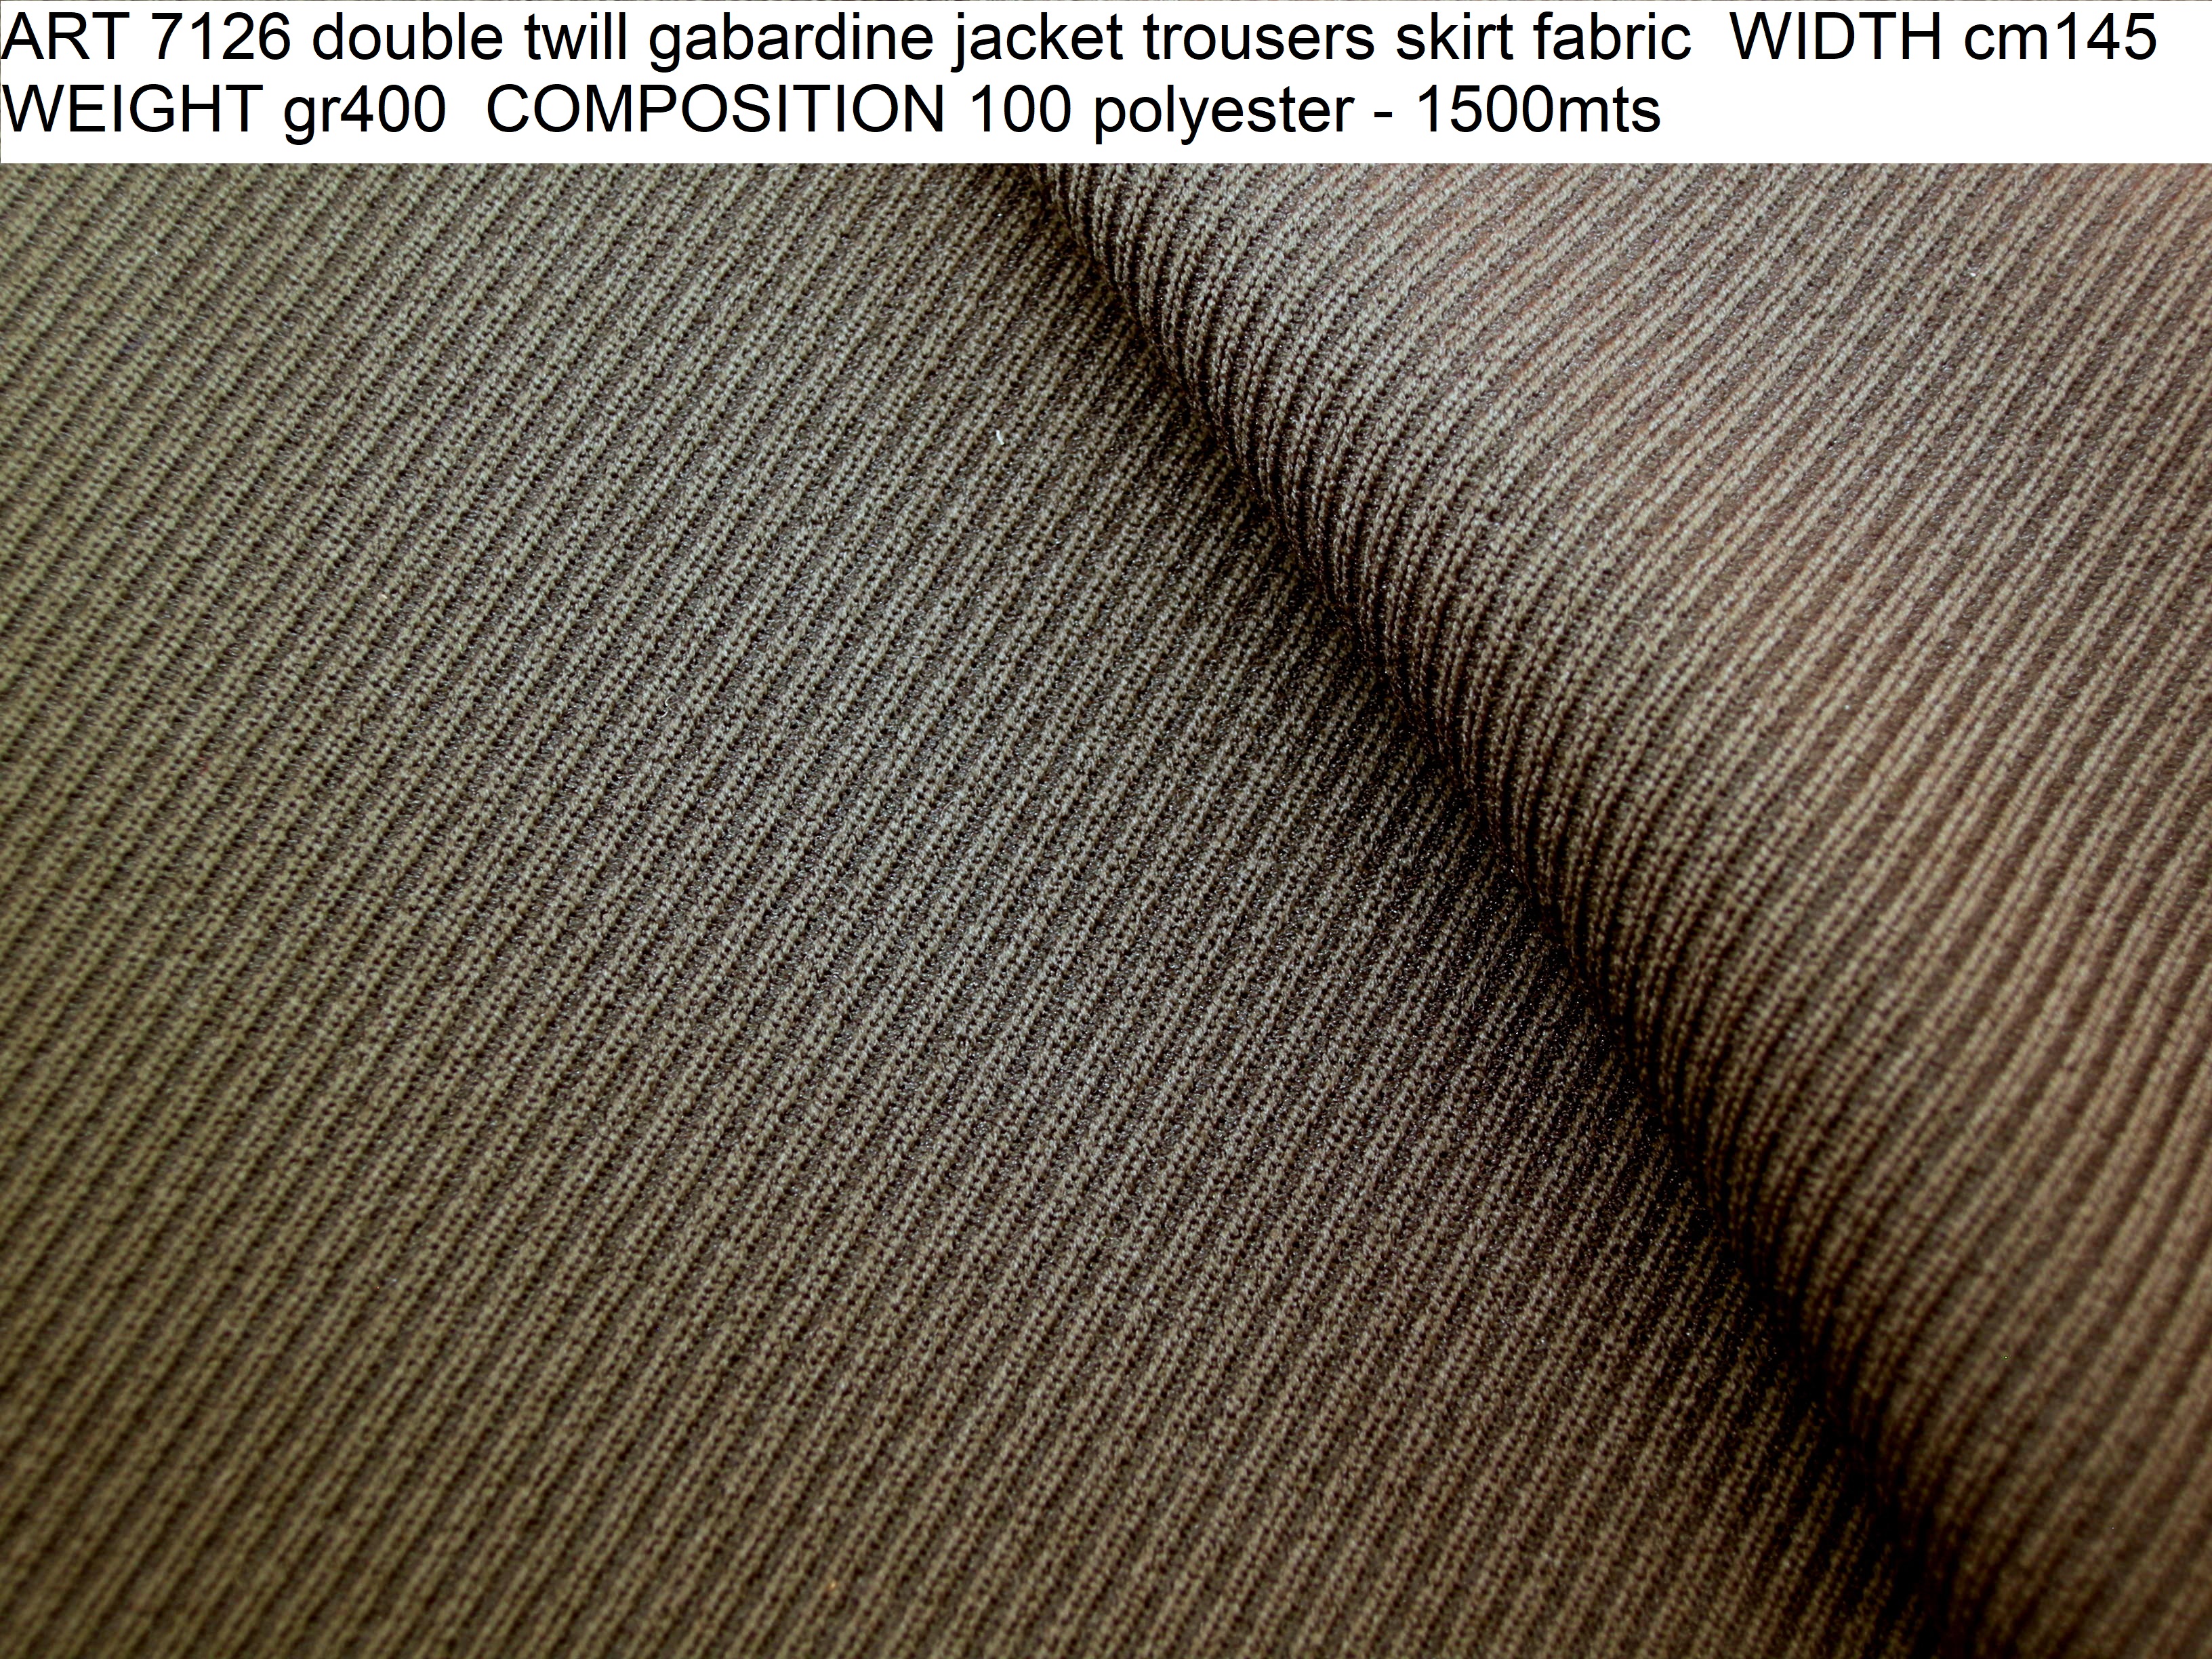 ART 7126 double twill gabardine jacket trousers skirt fabric WIDTH cm145 WEIGHT gr400 COMPOSITION 100 polyester - 1500mts